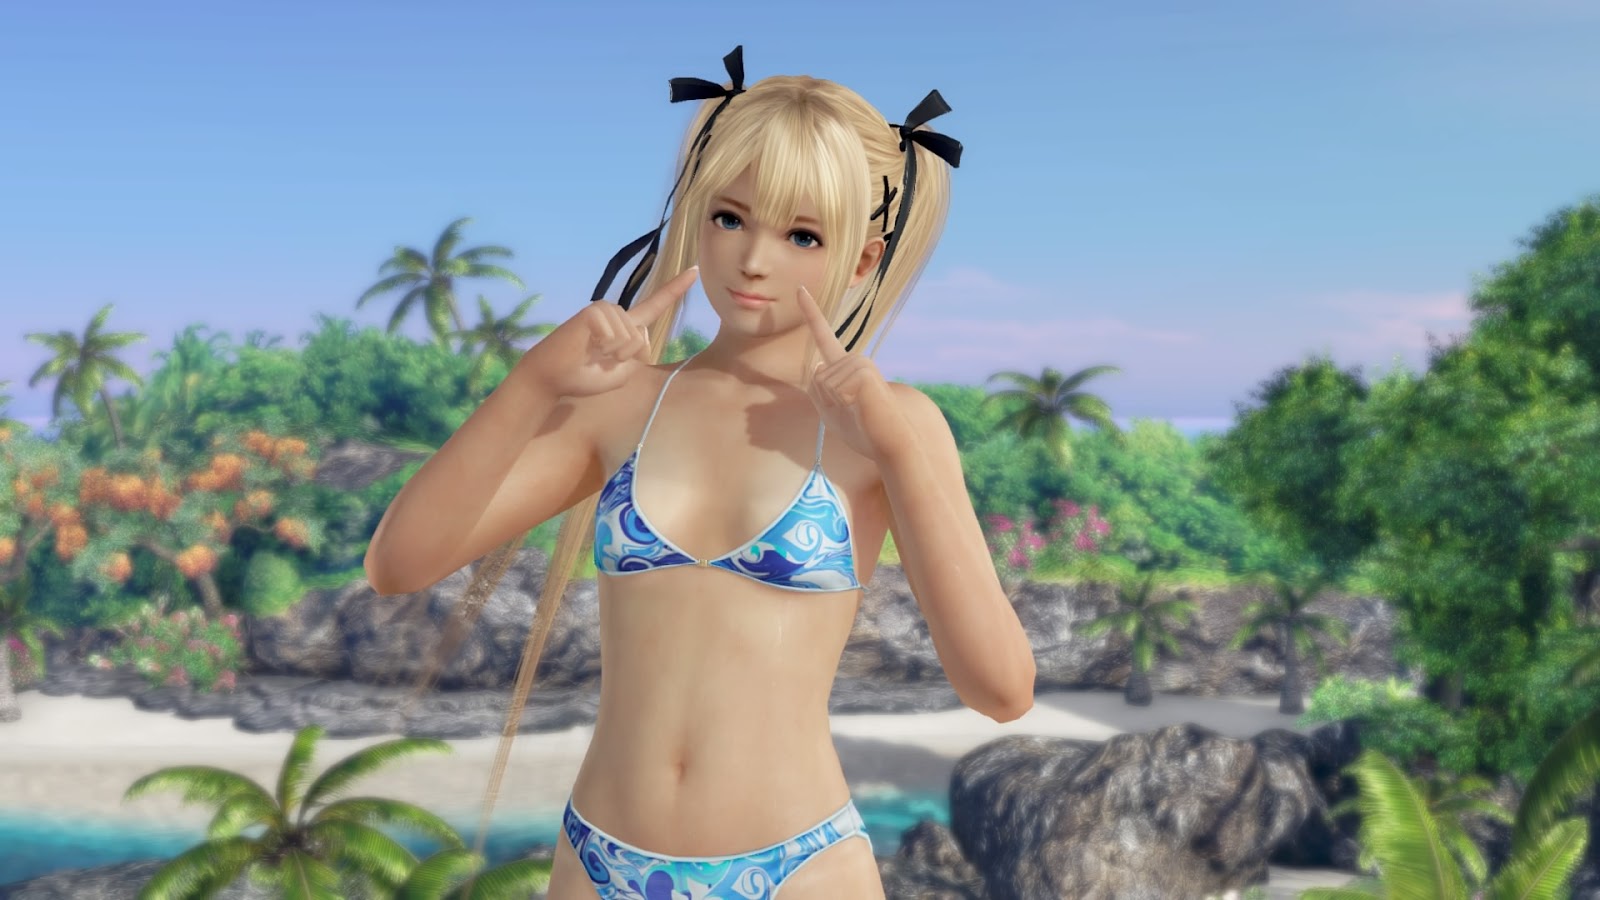 Marie Rose del Dead or Alive Xtreme 3.